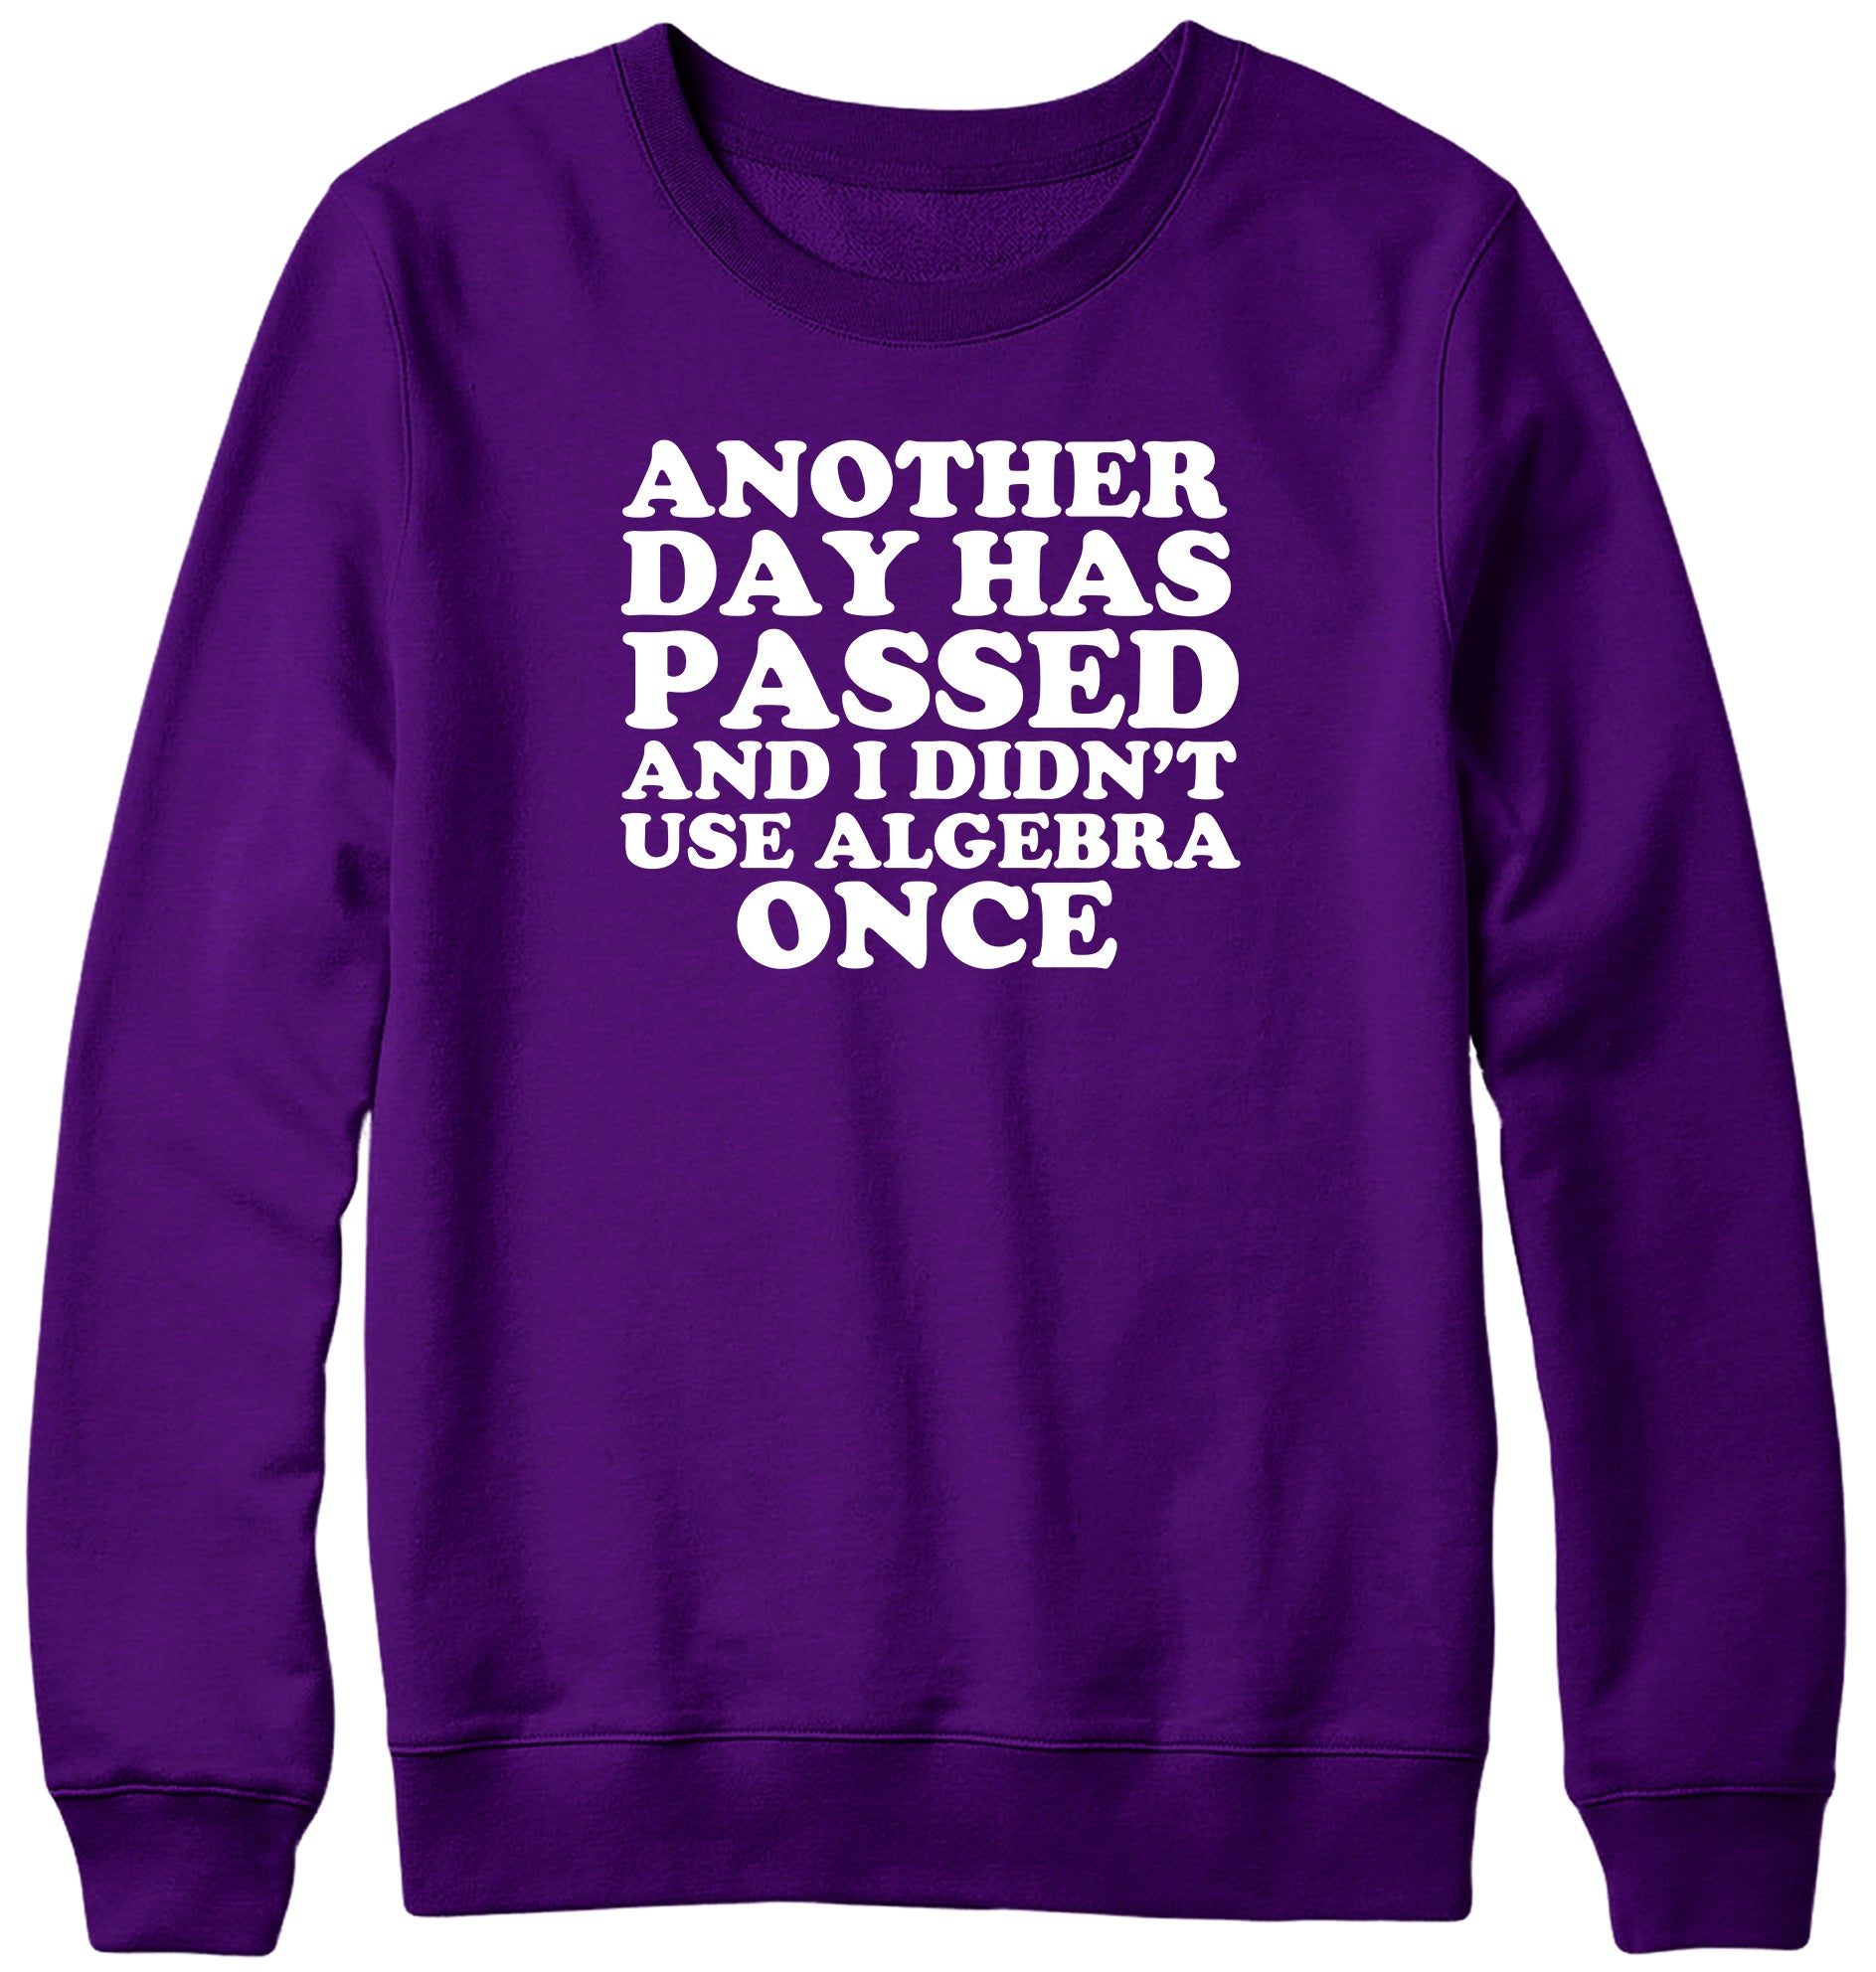 ANOTHER DAY HAS PASSED AND I DIDN'T USE ALGEBRA ONCE WOMENS LADIES MENS UNISEX SWEATSHIRT